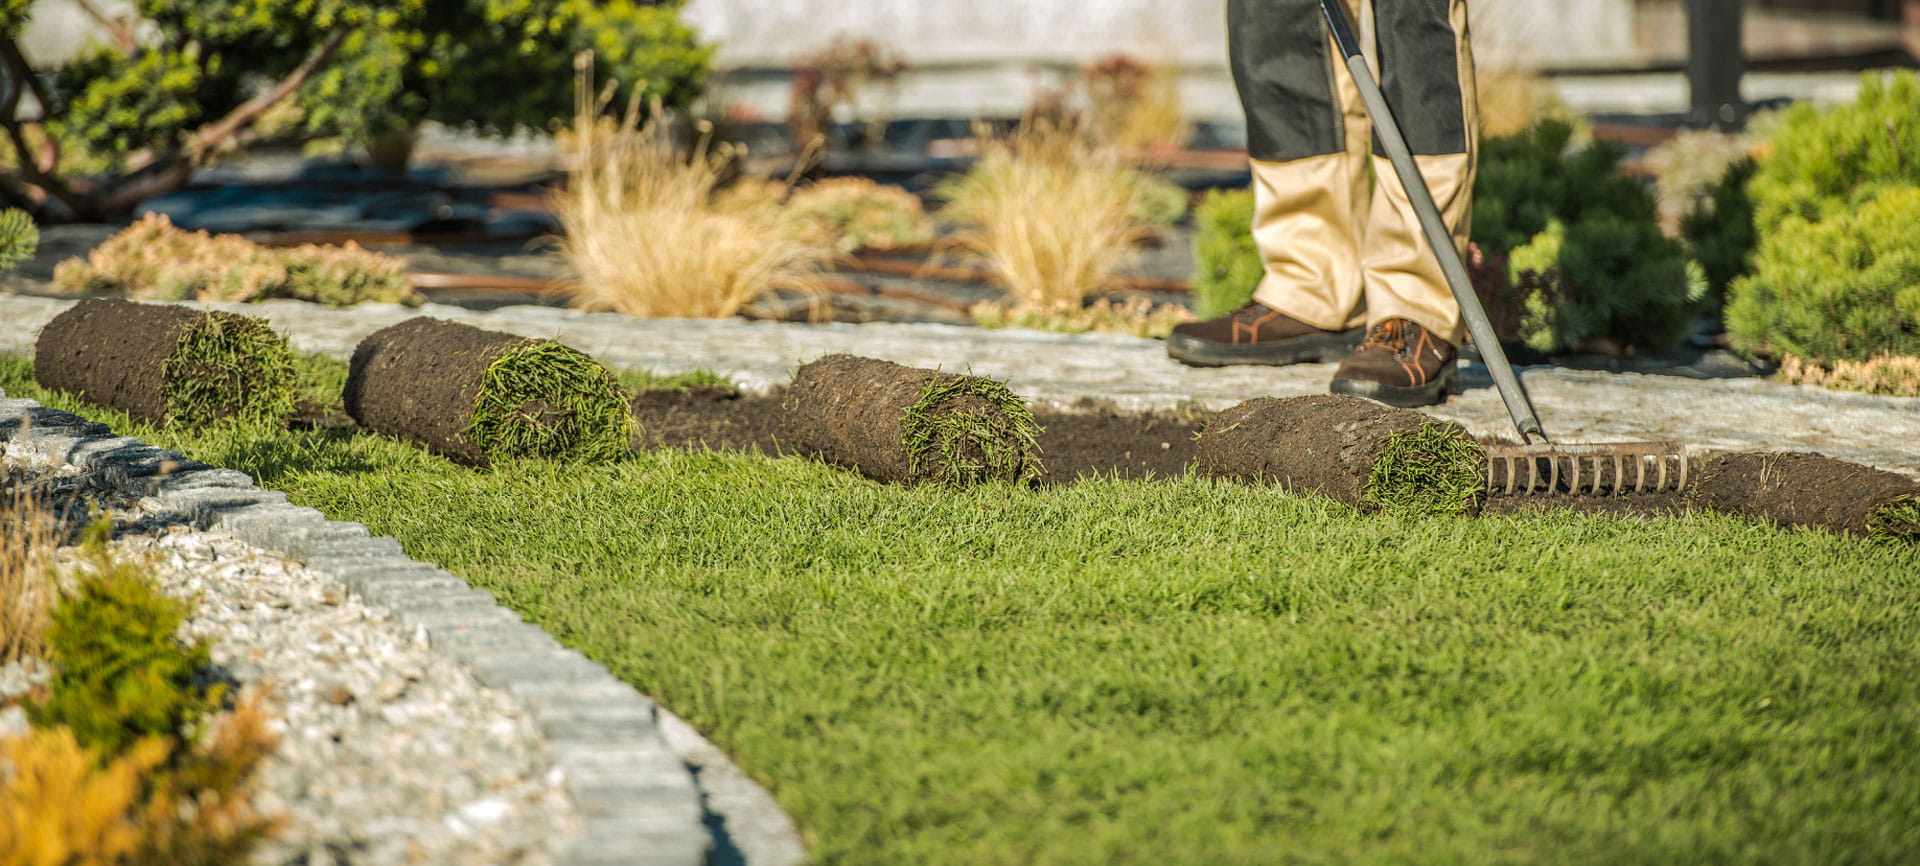 5 Benefits of Adding Mulch to Your Landscaping